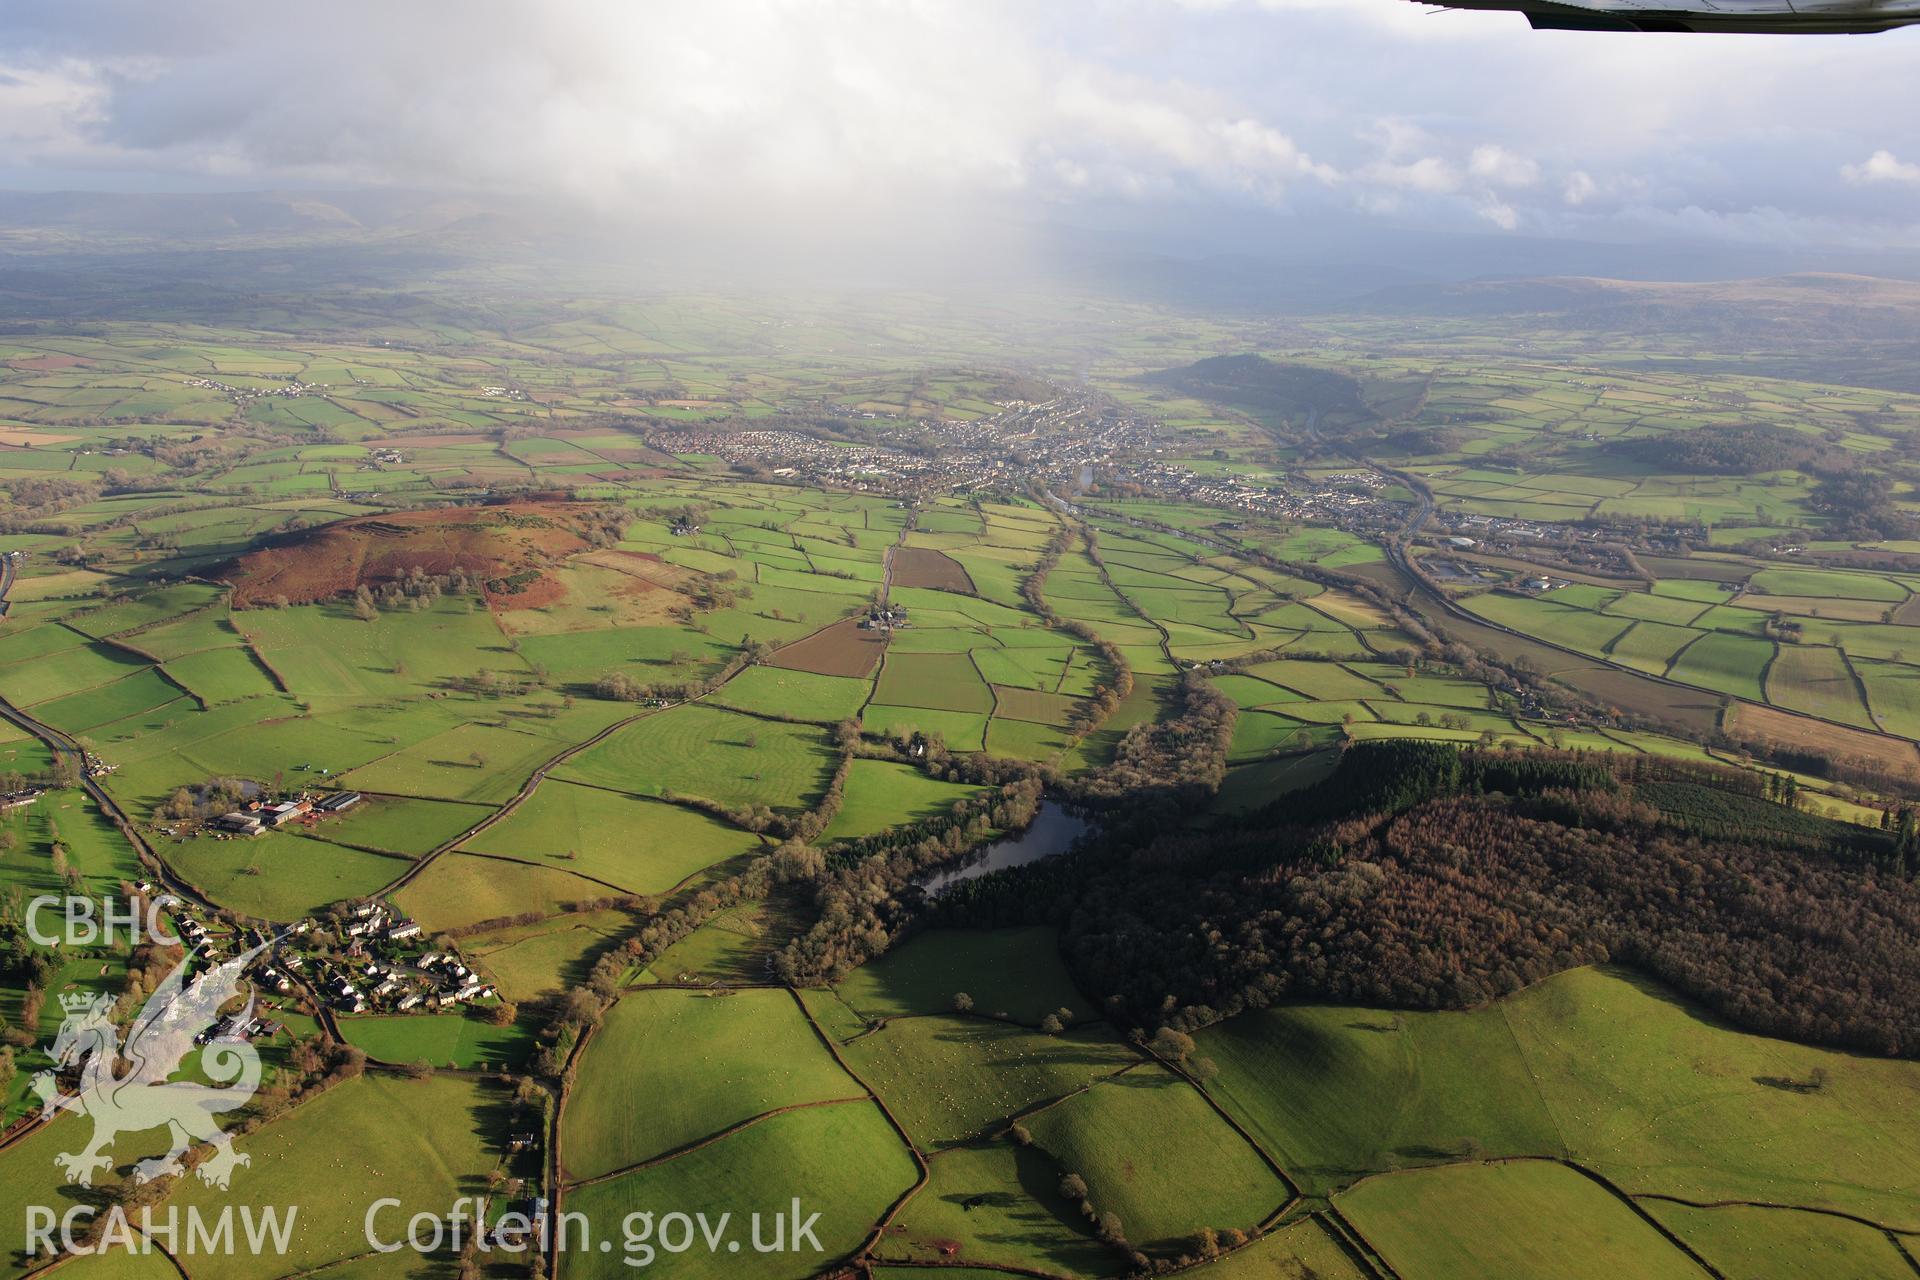 RCAHMW colour oblique photograph of Brecon, distant townscape from north-west, with rain show erupting. Taken by Toby Driver on 23/11/2012.